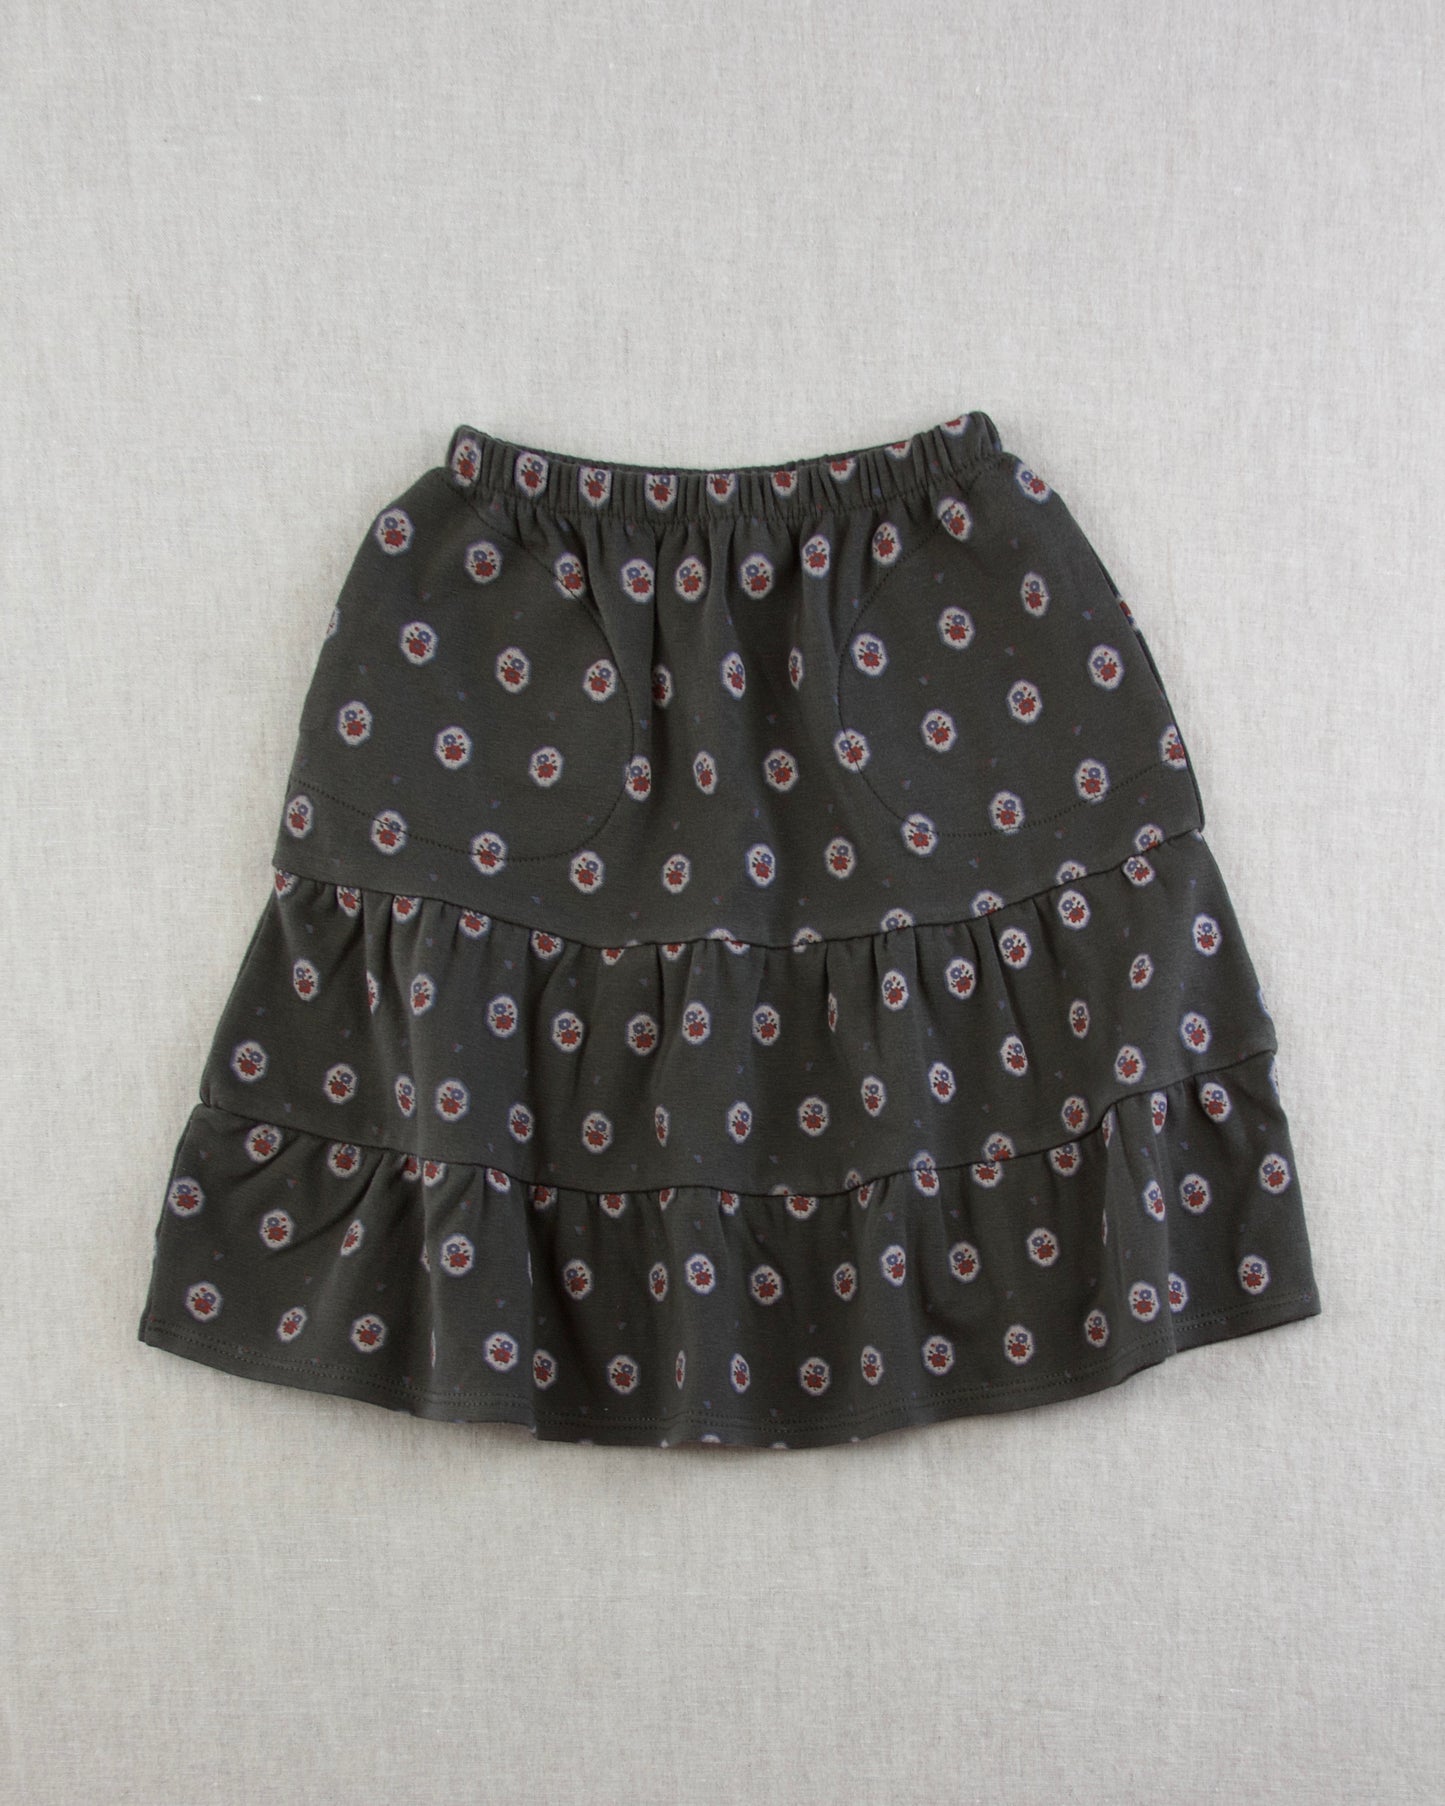 pima tiered skirt. coal cameo floral